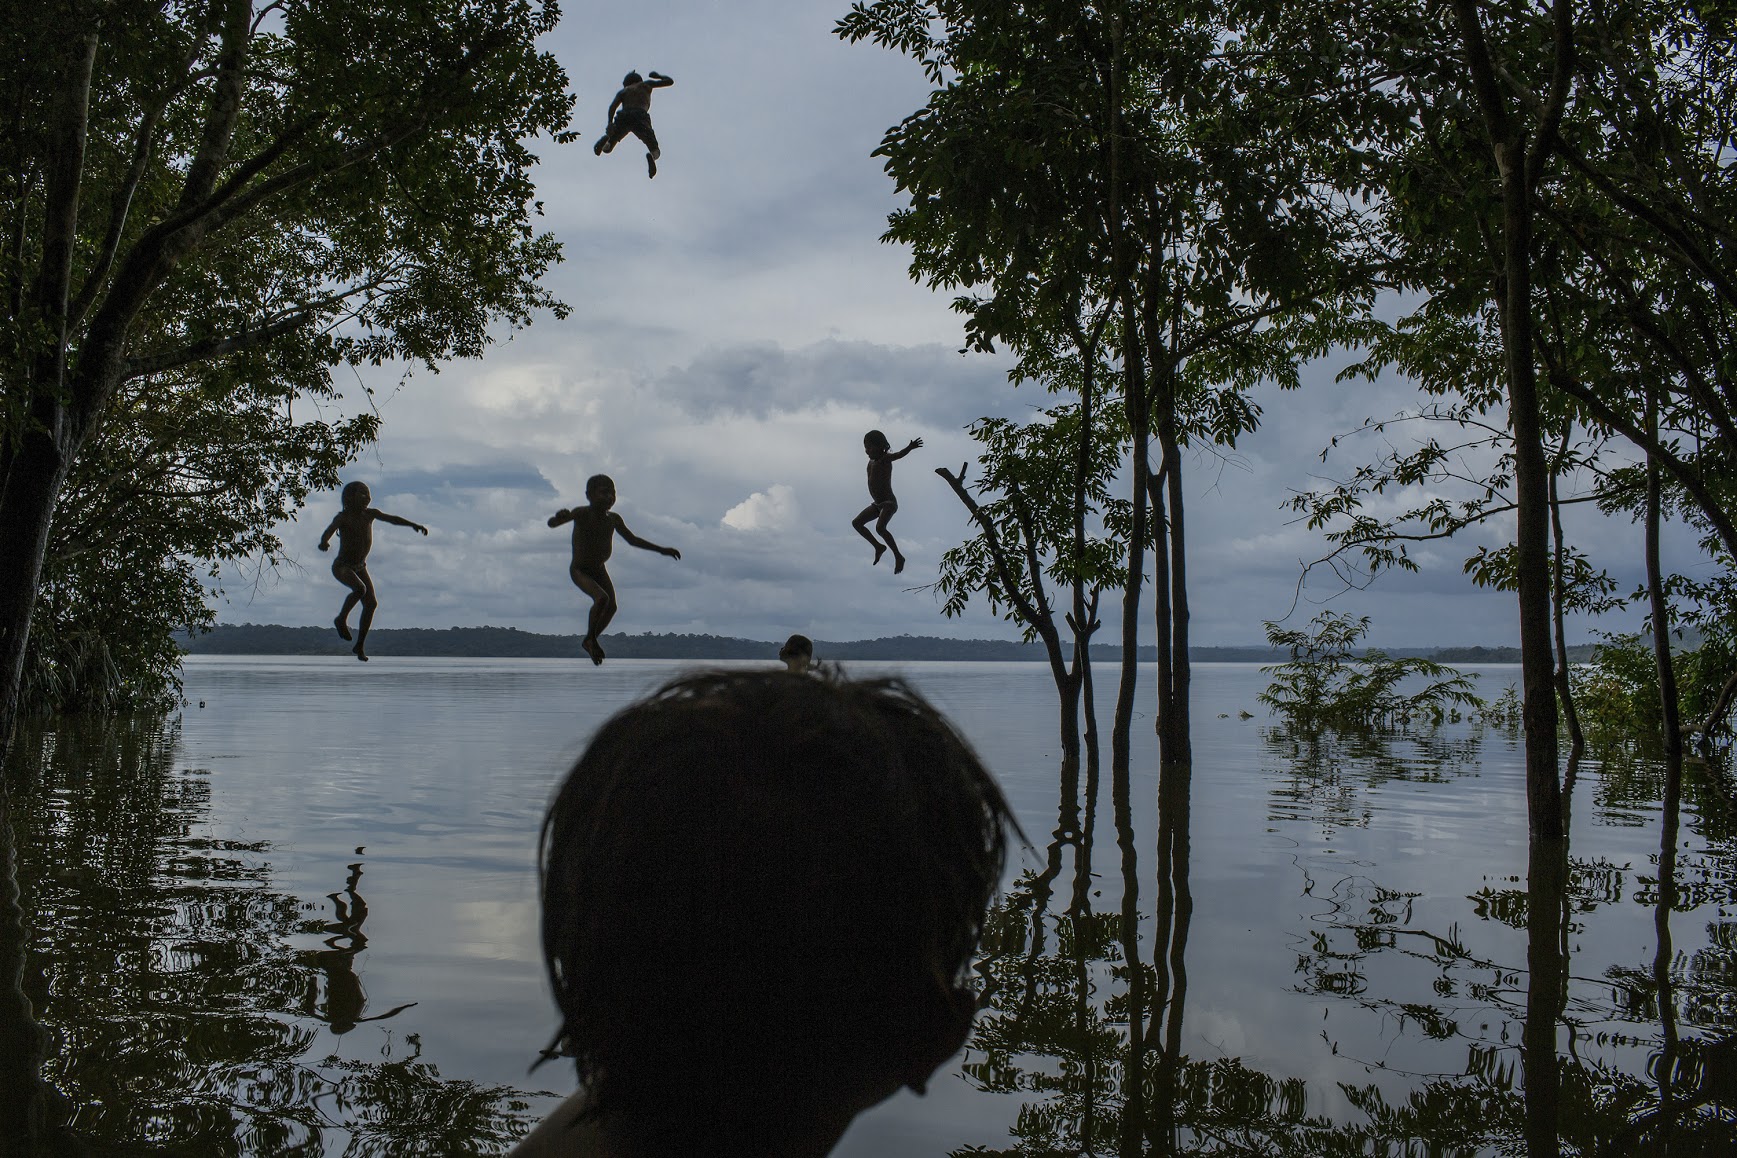 1. Tapajós River, Itaituba, Pará State, Brazil, on February 10, 2015. Indigenous children jump into the water as they play around the Tapajós river, in the Munduruku tribal area called Sawré Muybu.